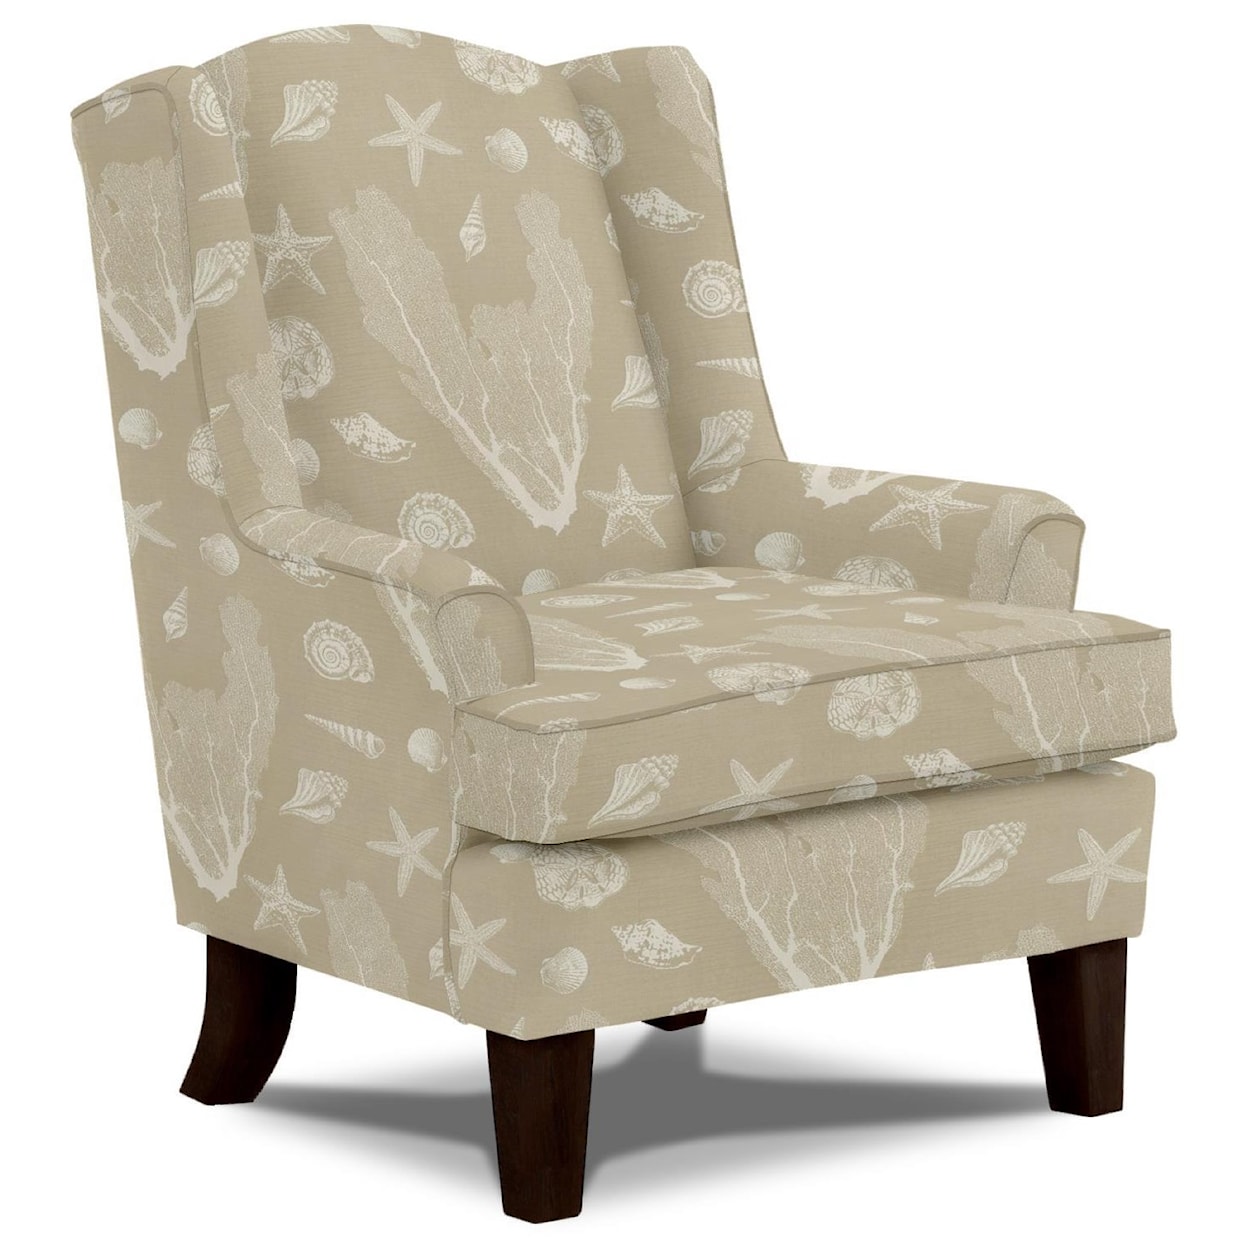 Best Home Furnishings Wing Chairs Andrea Wing Chair